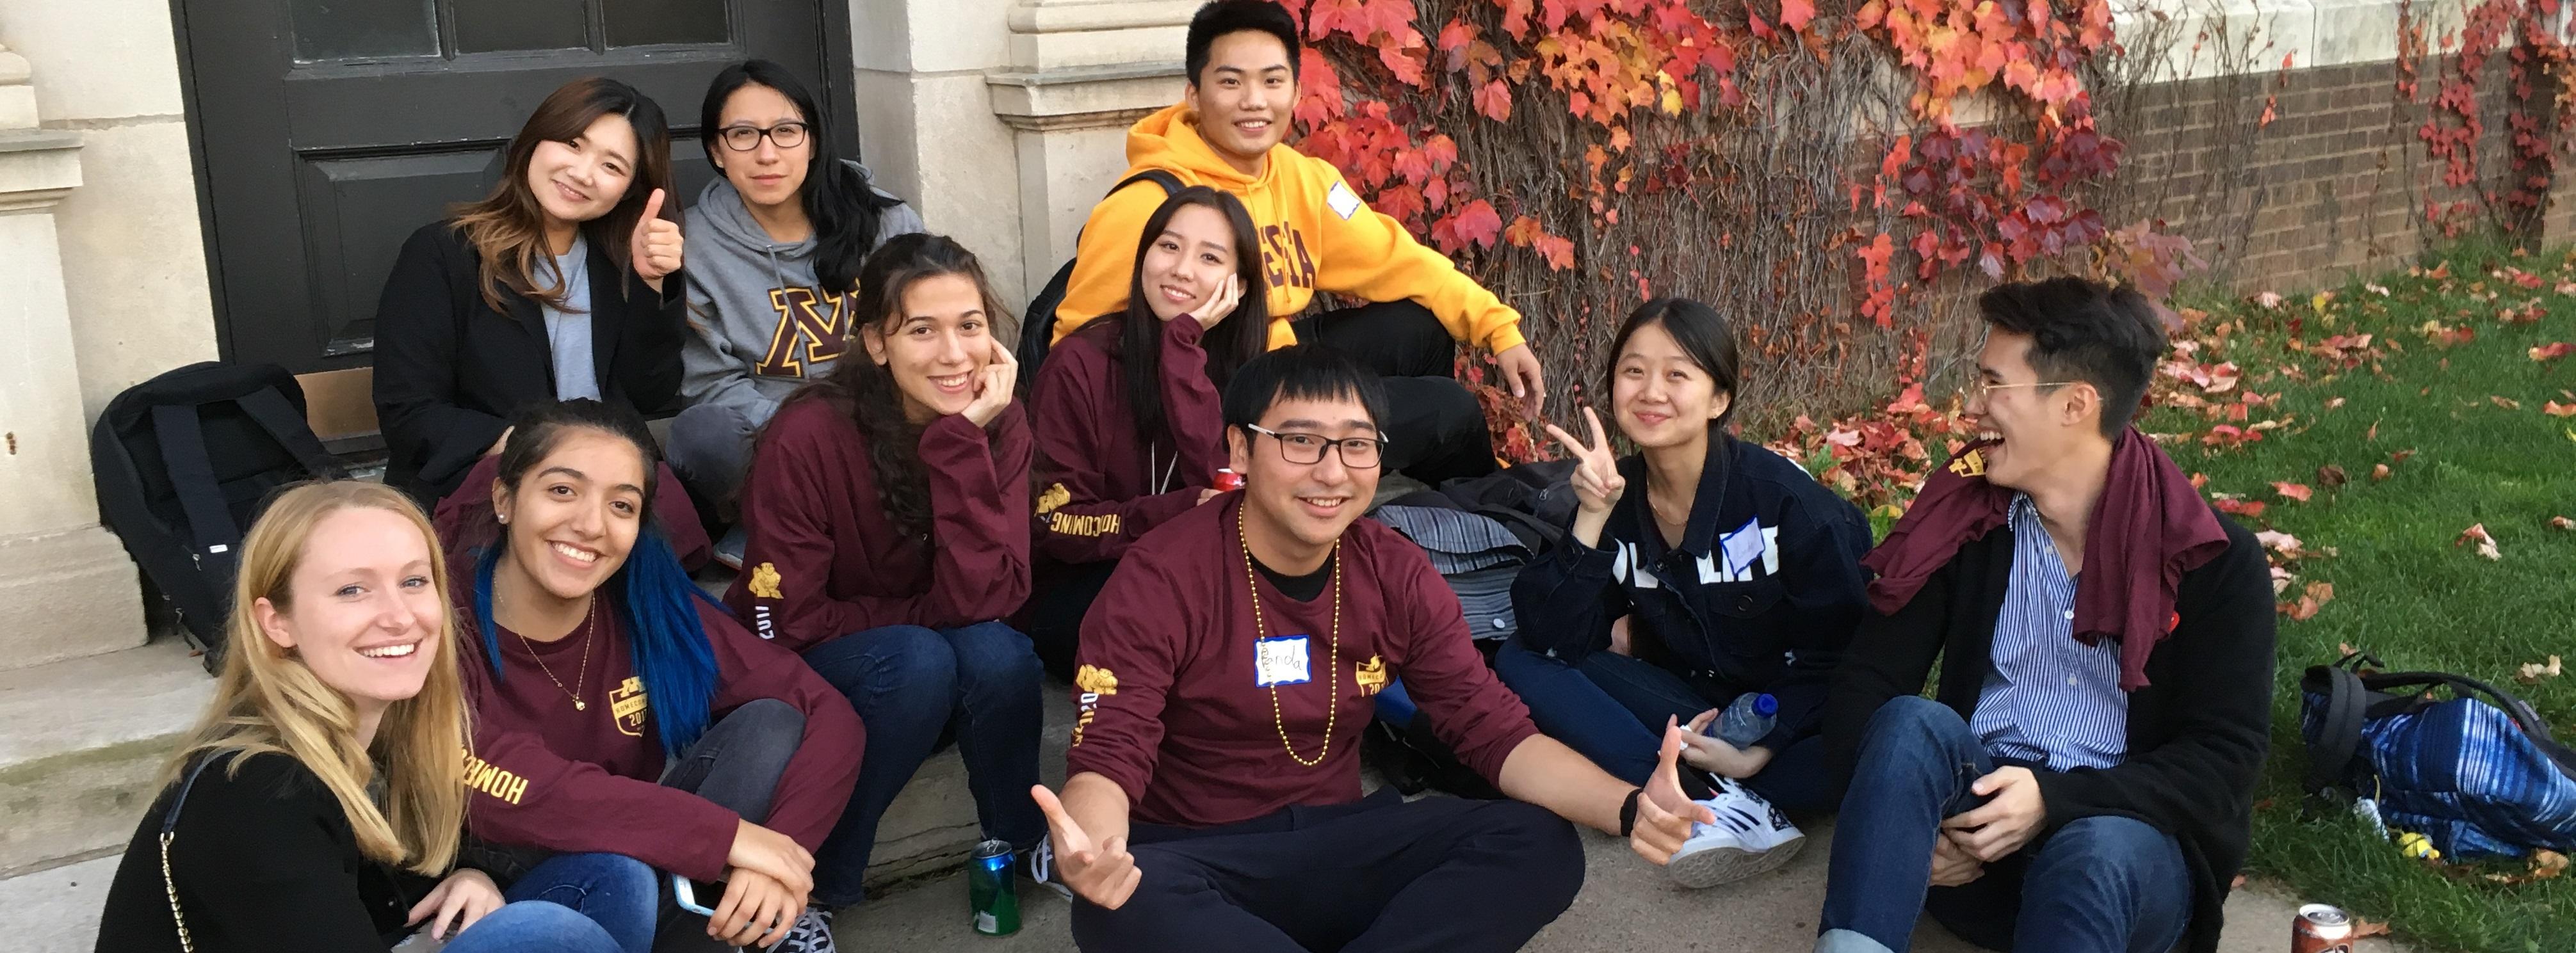 Students sitting on step outside at UMN Homecoming